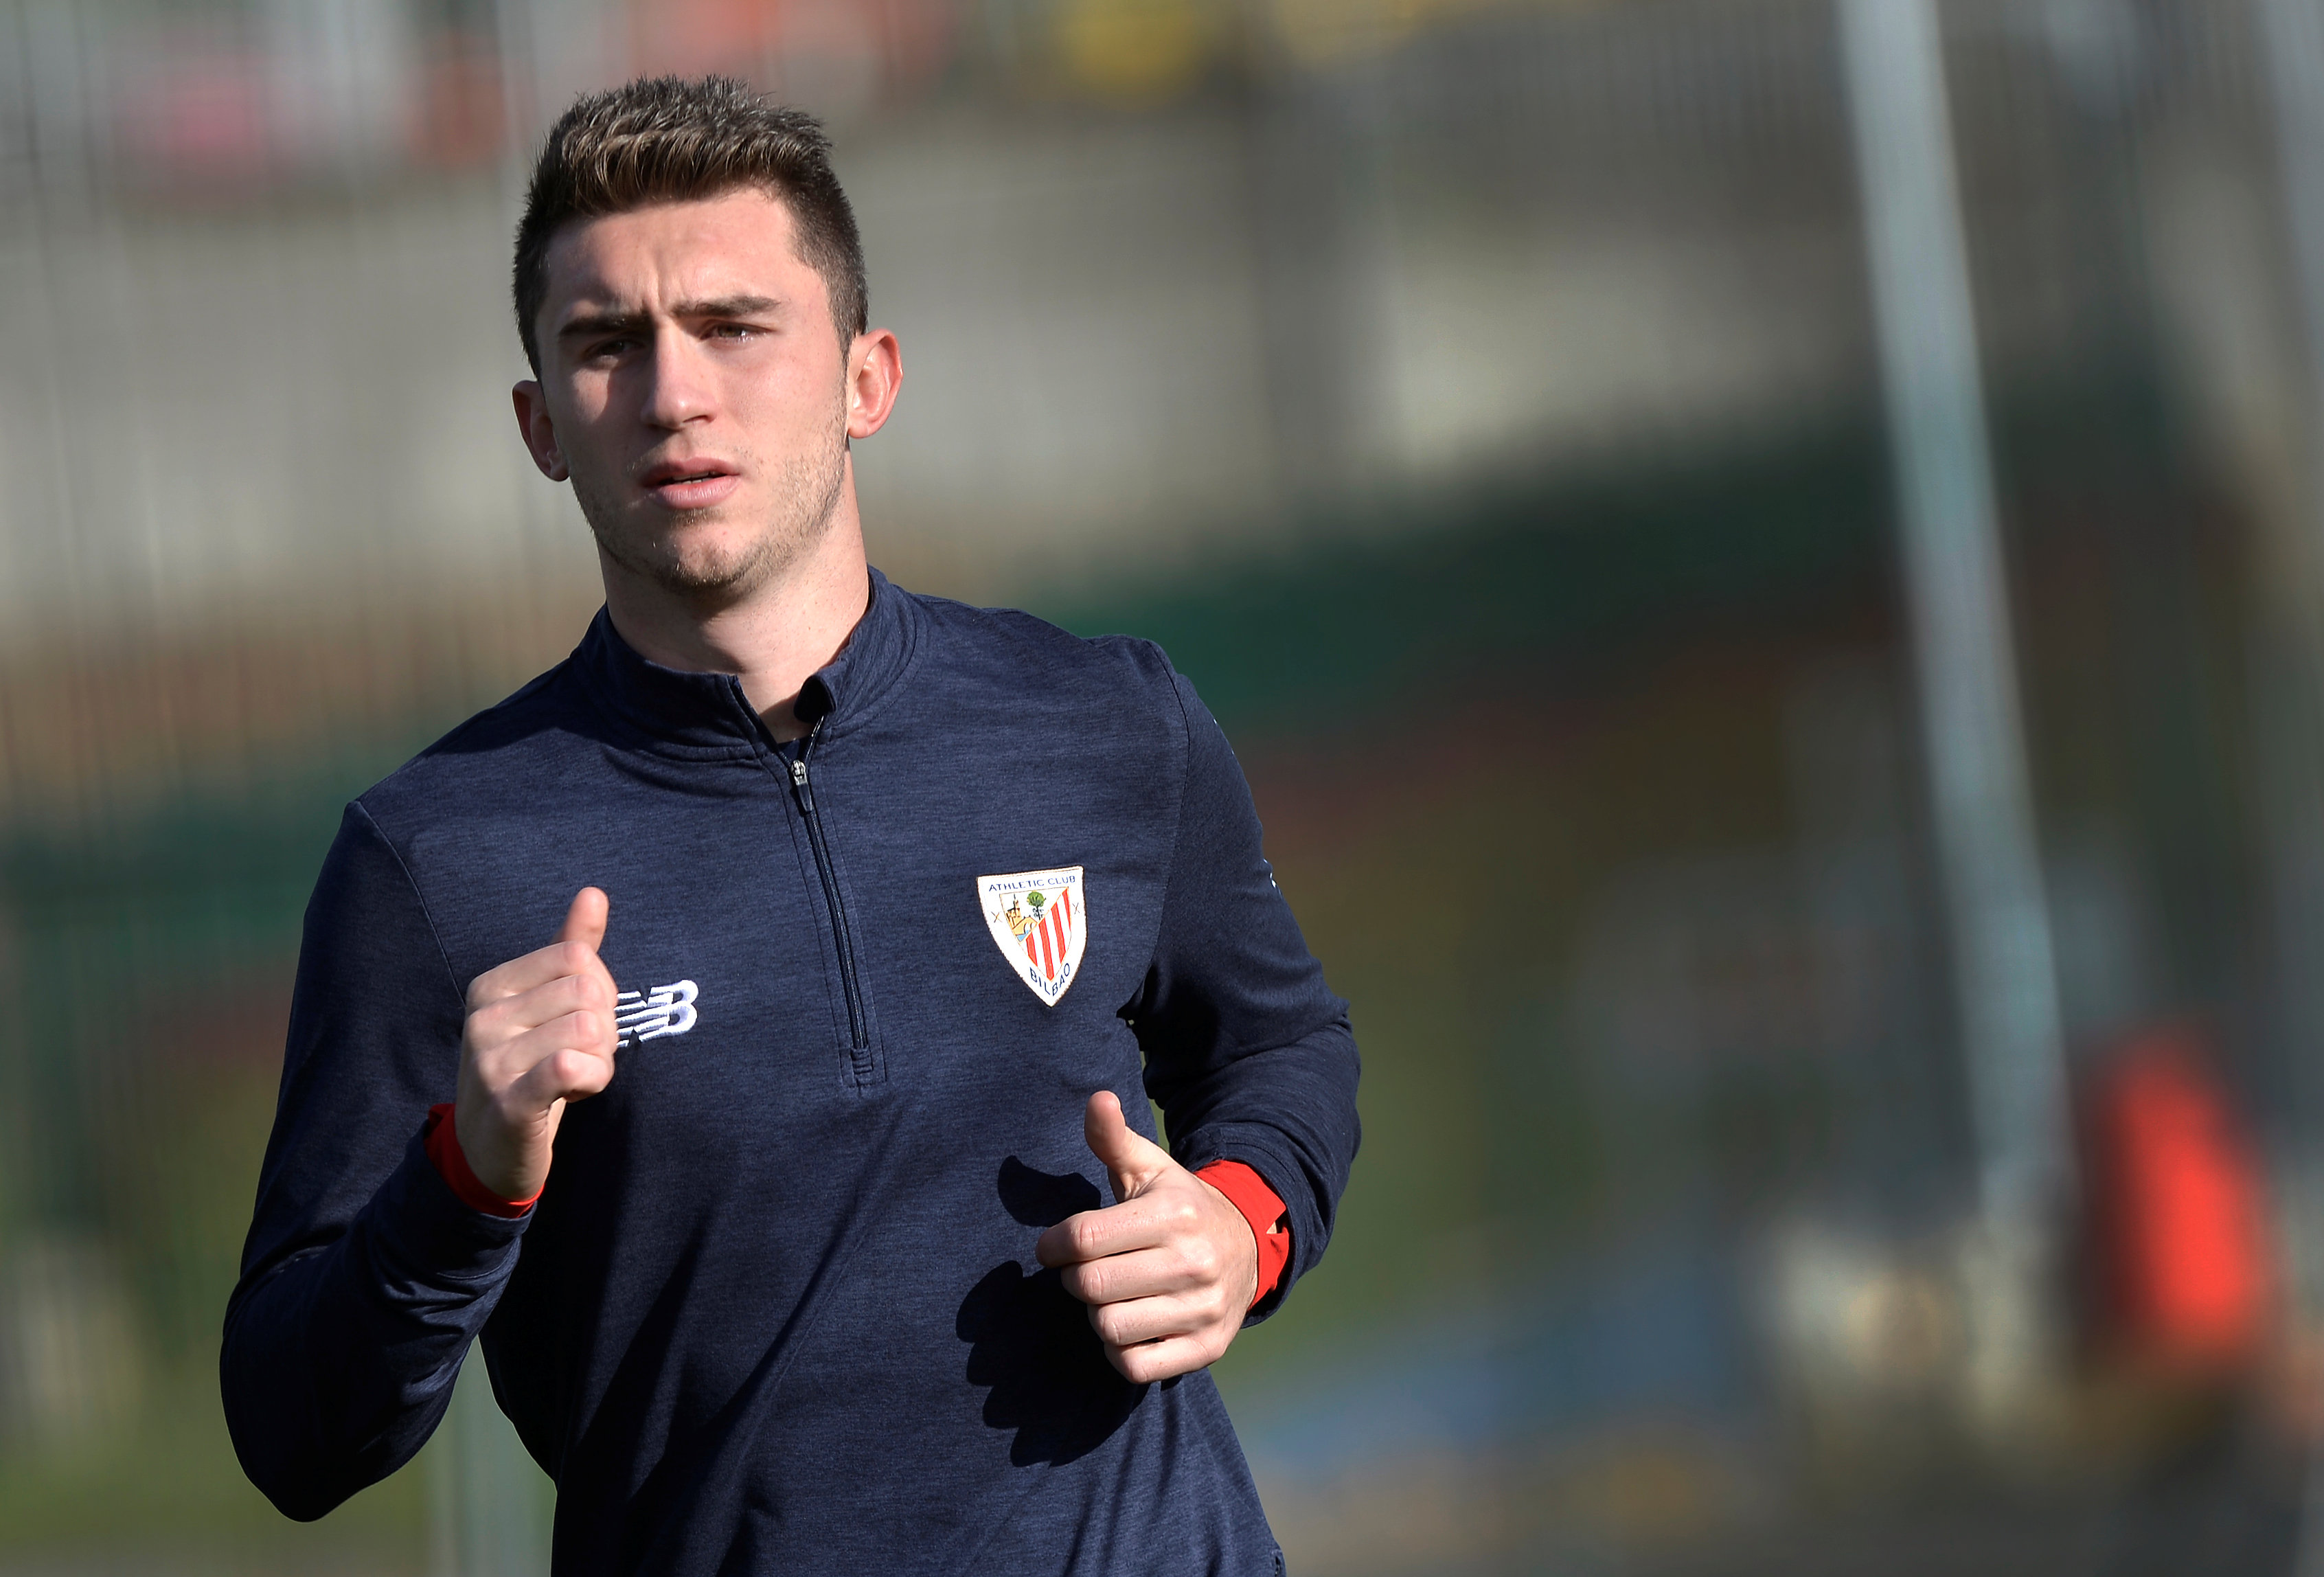 Athletic Bilbao's French defender Aymeric Laporte trains at Lezama training ground, near Bilbao, Spain January 27, 2018. Manchester City have agreed on a club record 57 million pound (80 million dollars) deal for Laporte, according to local media. REUTERS/Vincent West